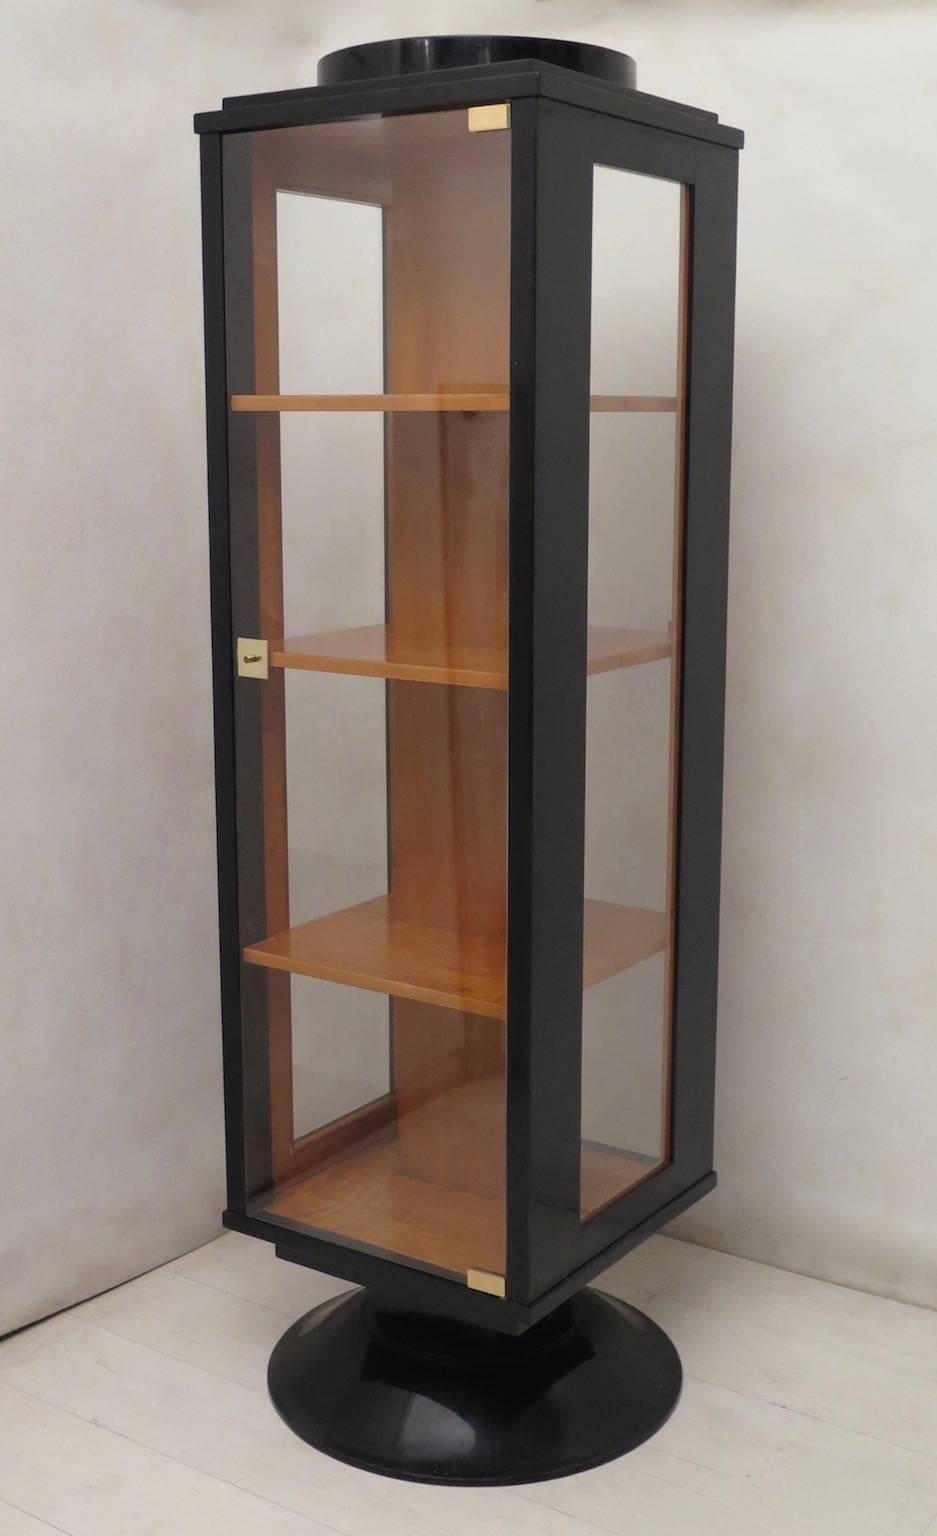 Pair of distinguishing Art Deco showcases, for their narrow and high design, and for the fact of being richly finished even internally.

All polished in black lacquer with a richly maple veneer inside. It has two glass doors that allow access